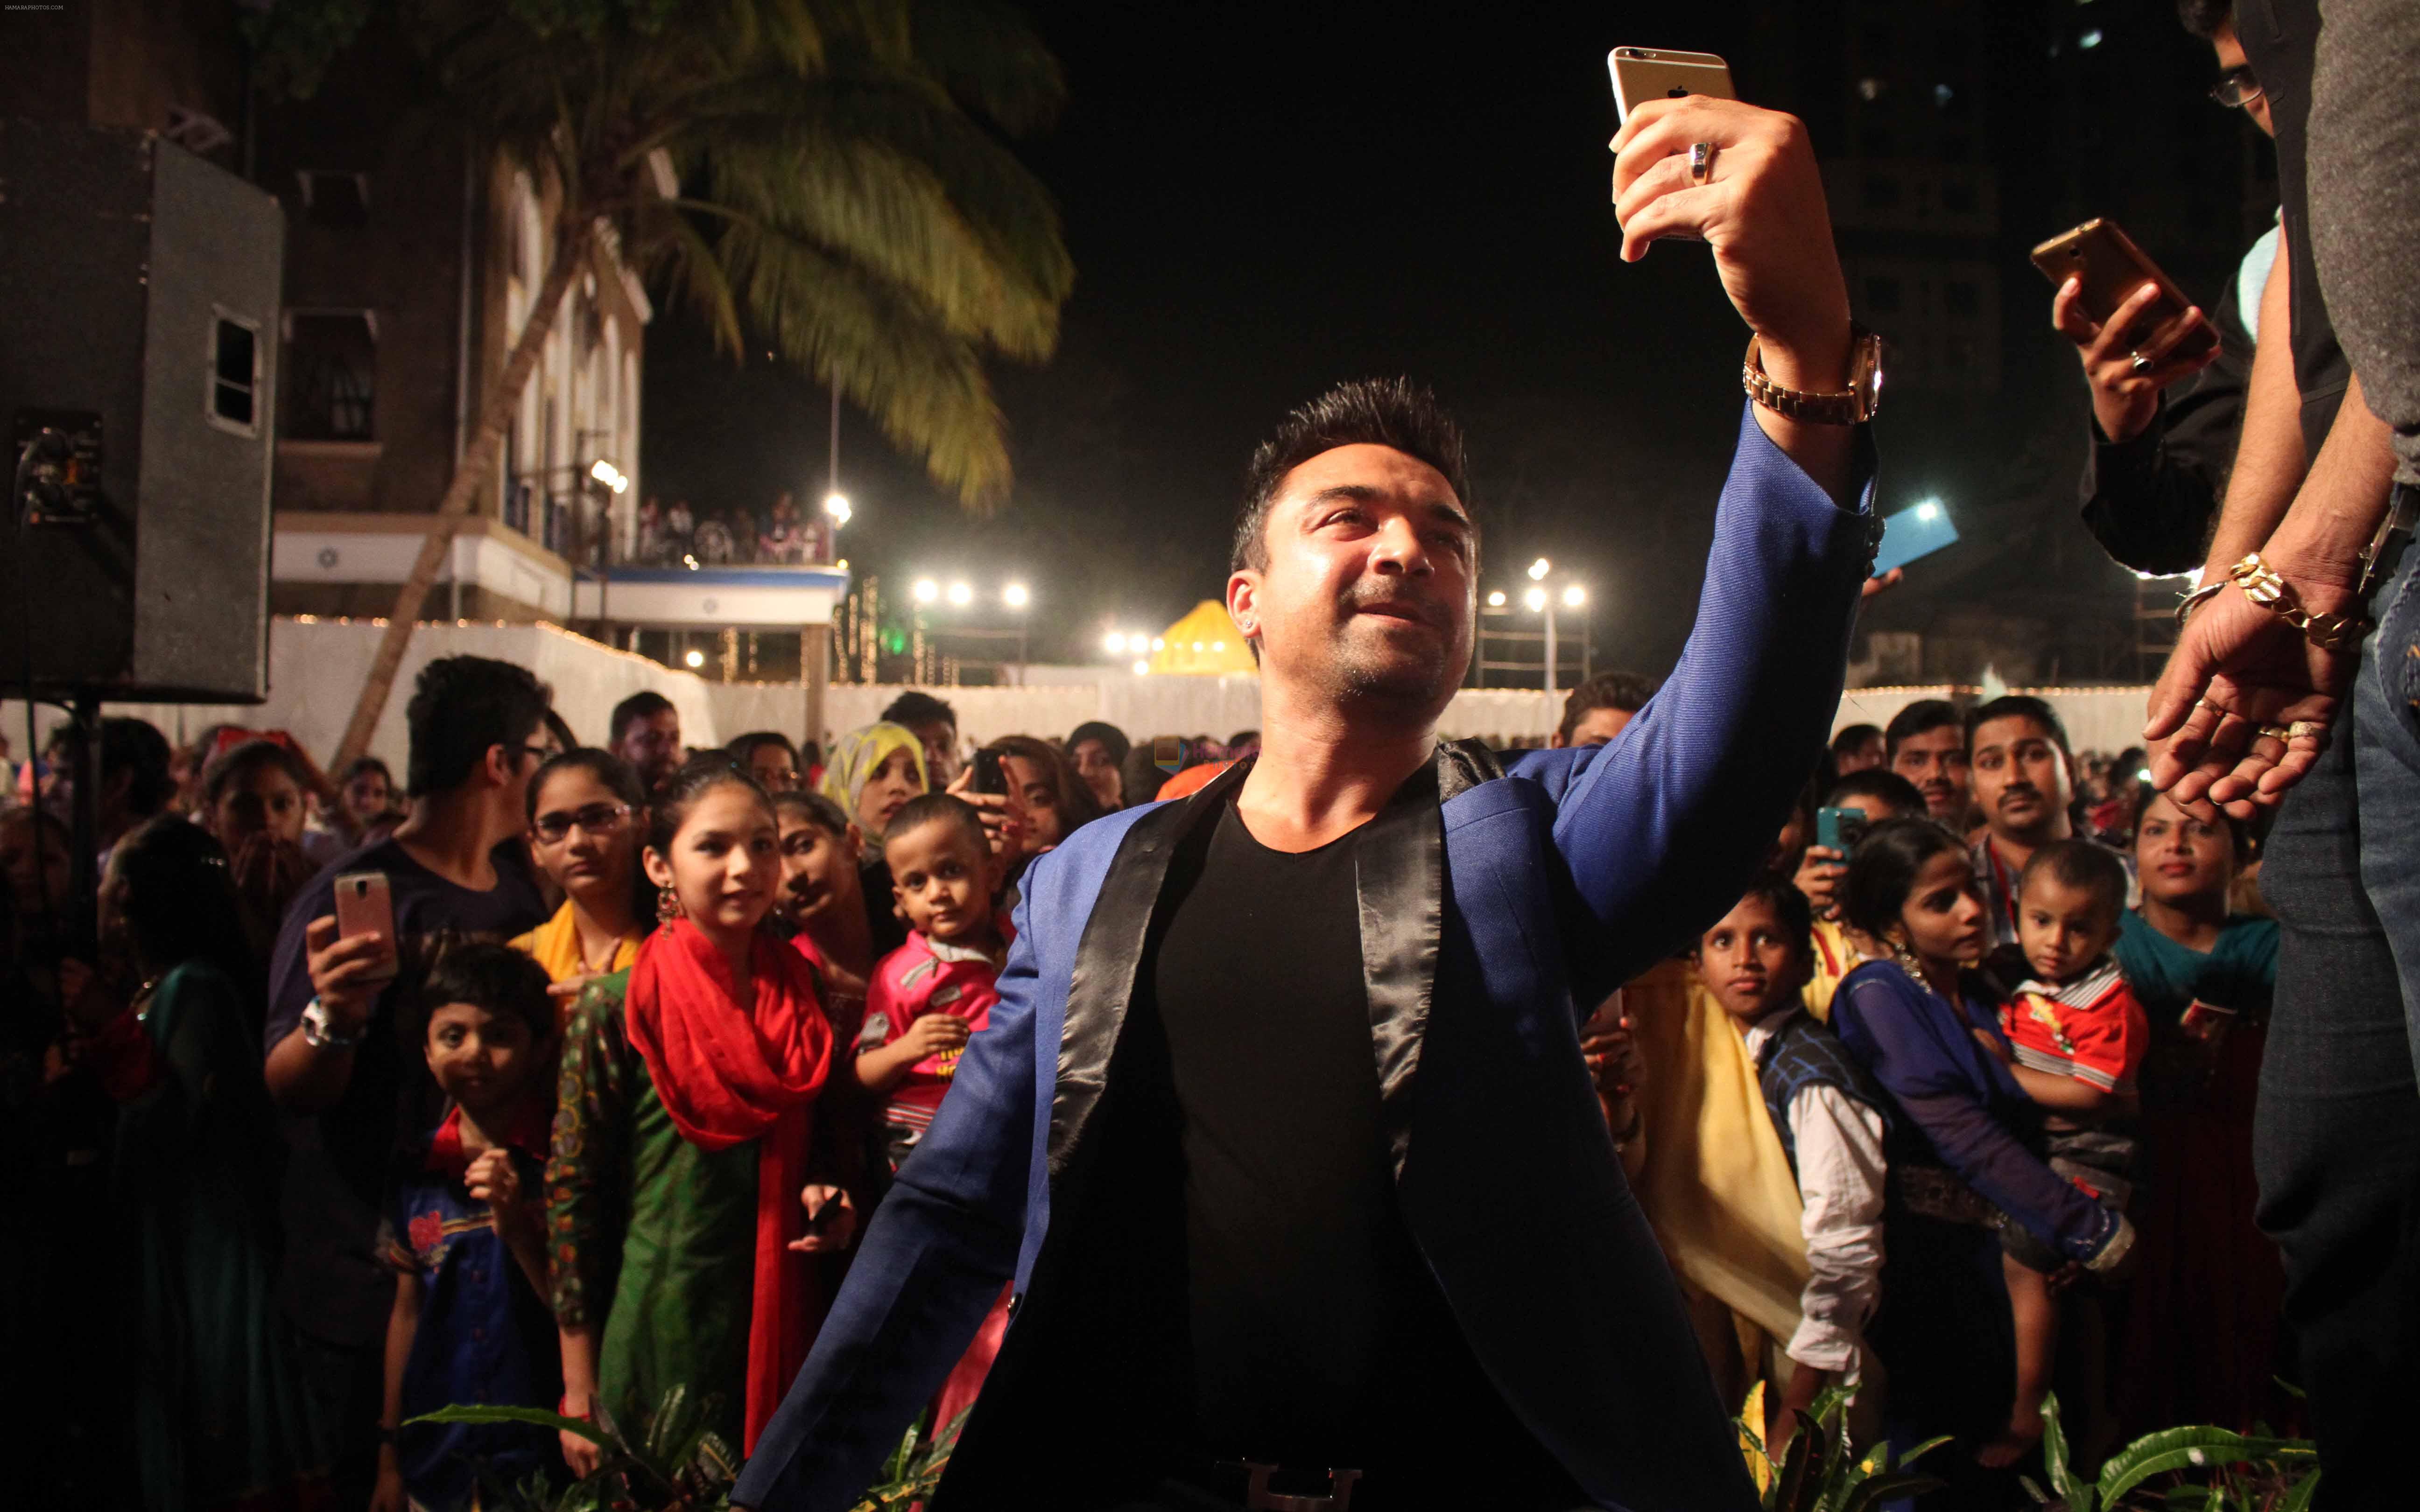 Ejaz Khan in a selfie mode at the Mass Marraige Ceremony organised by socialite Sabira Sikwani6